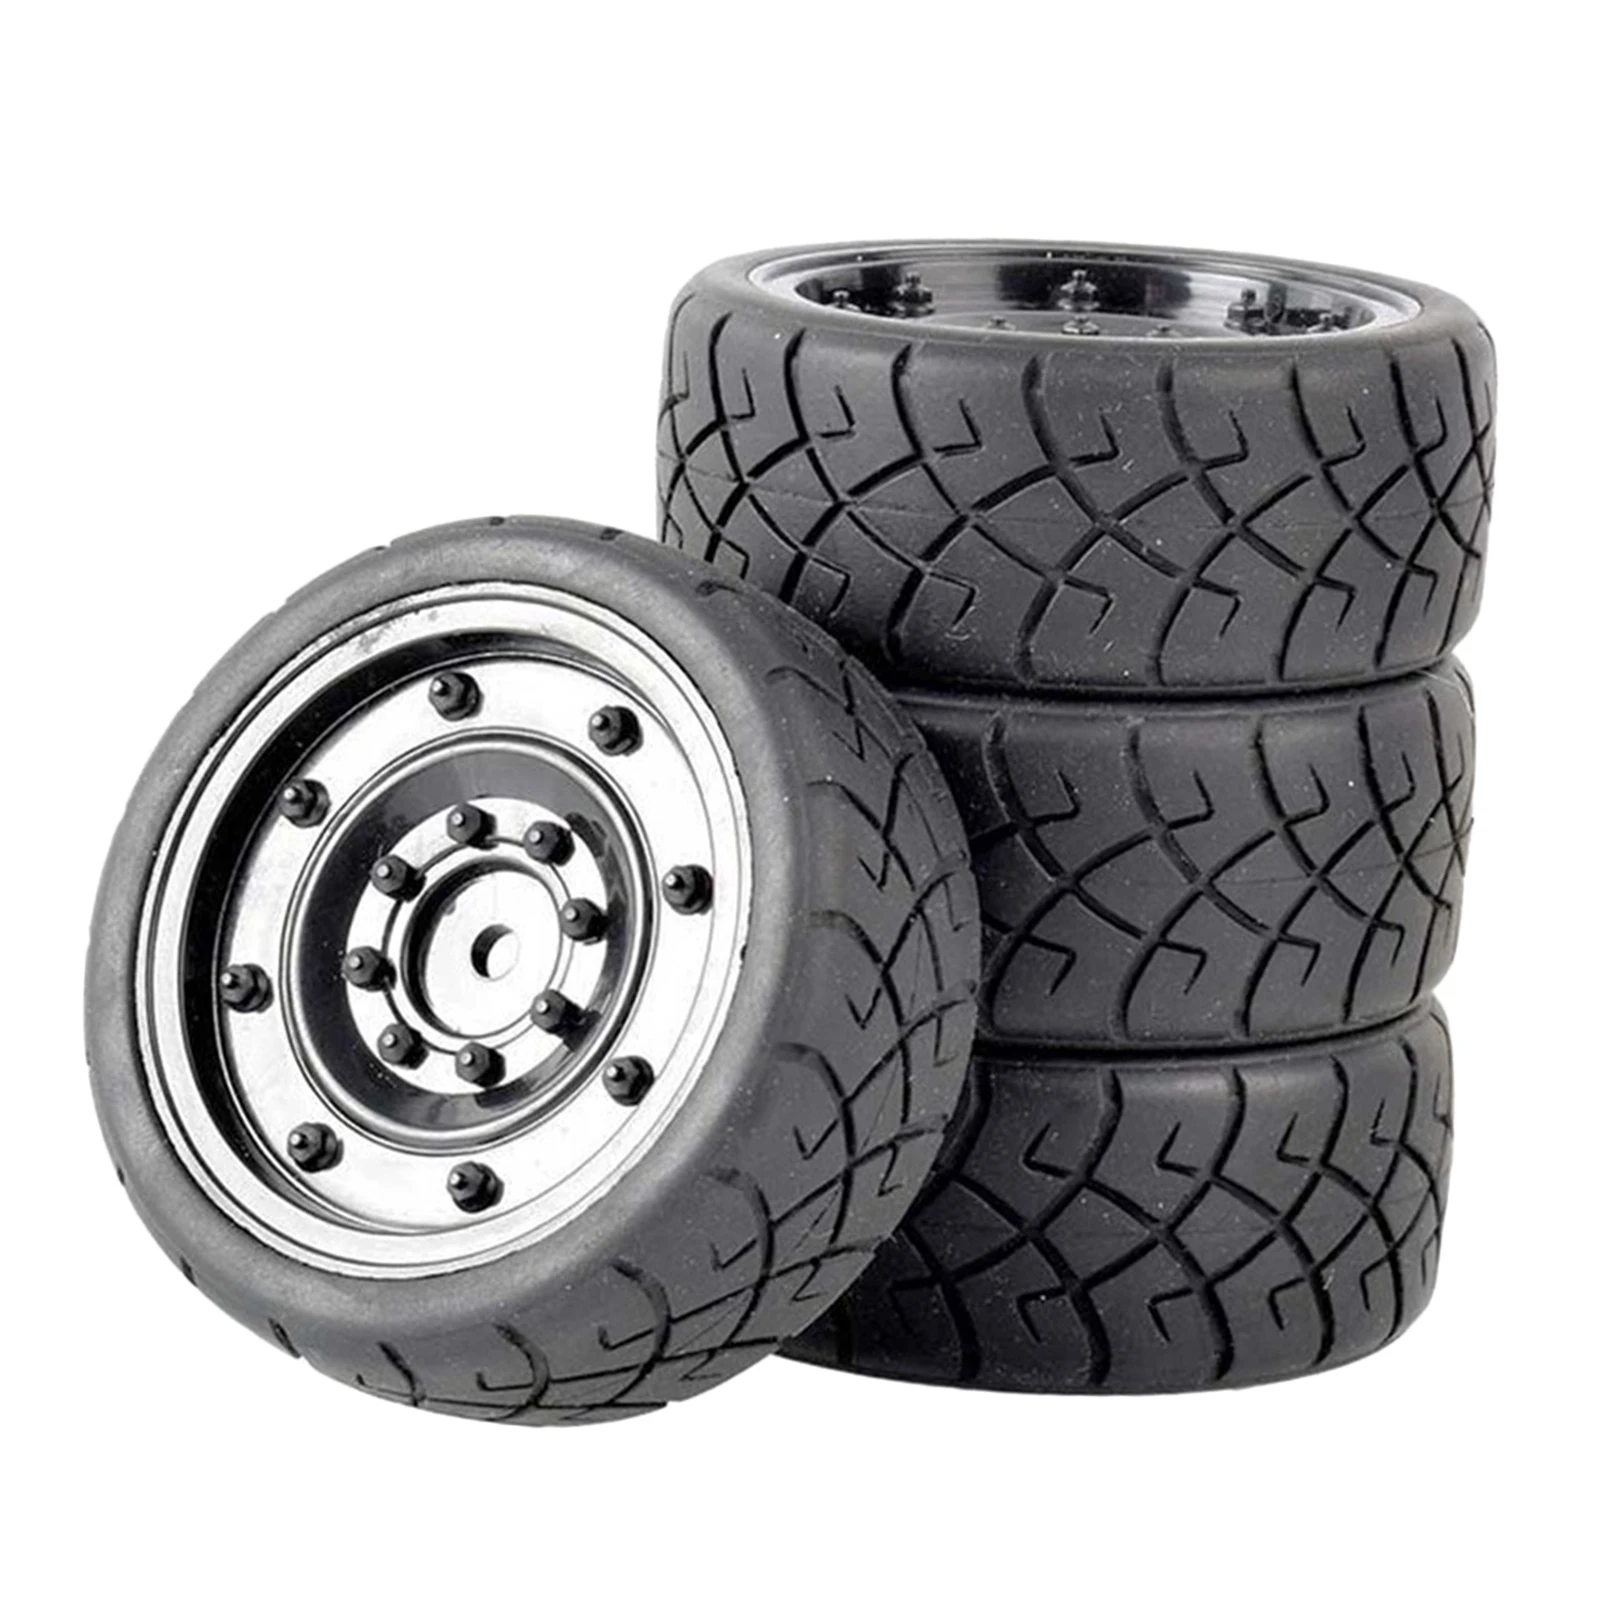 4pieces 1:10 Rubber Tire RC Wheel Rim Fit for WLtoys 144001 124018 124019 Accessories images - 6